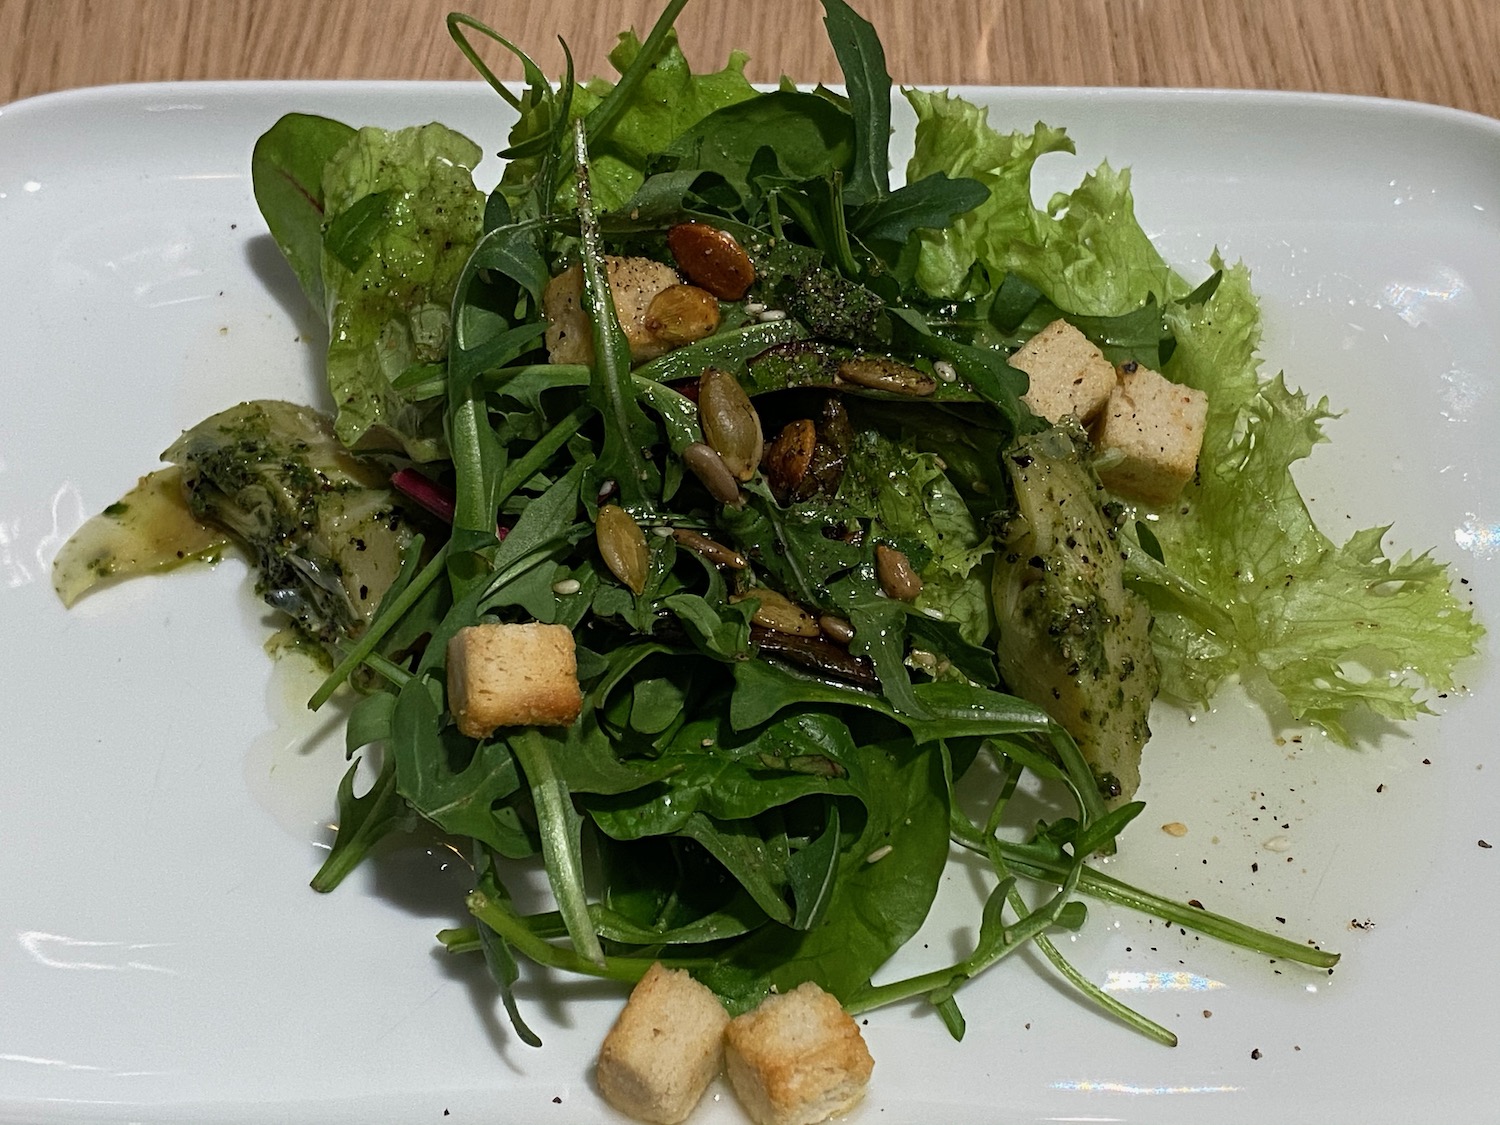 a plate of salad on a wood table